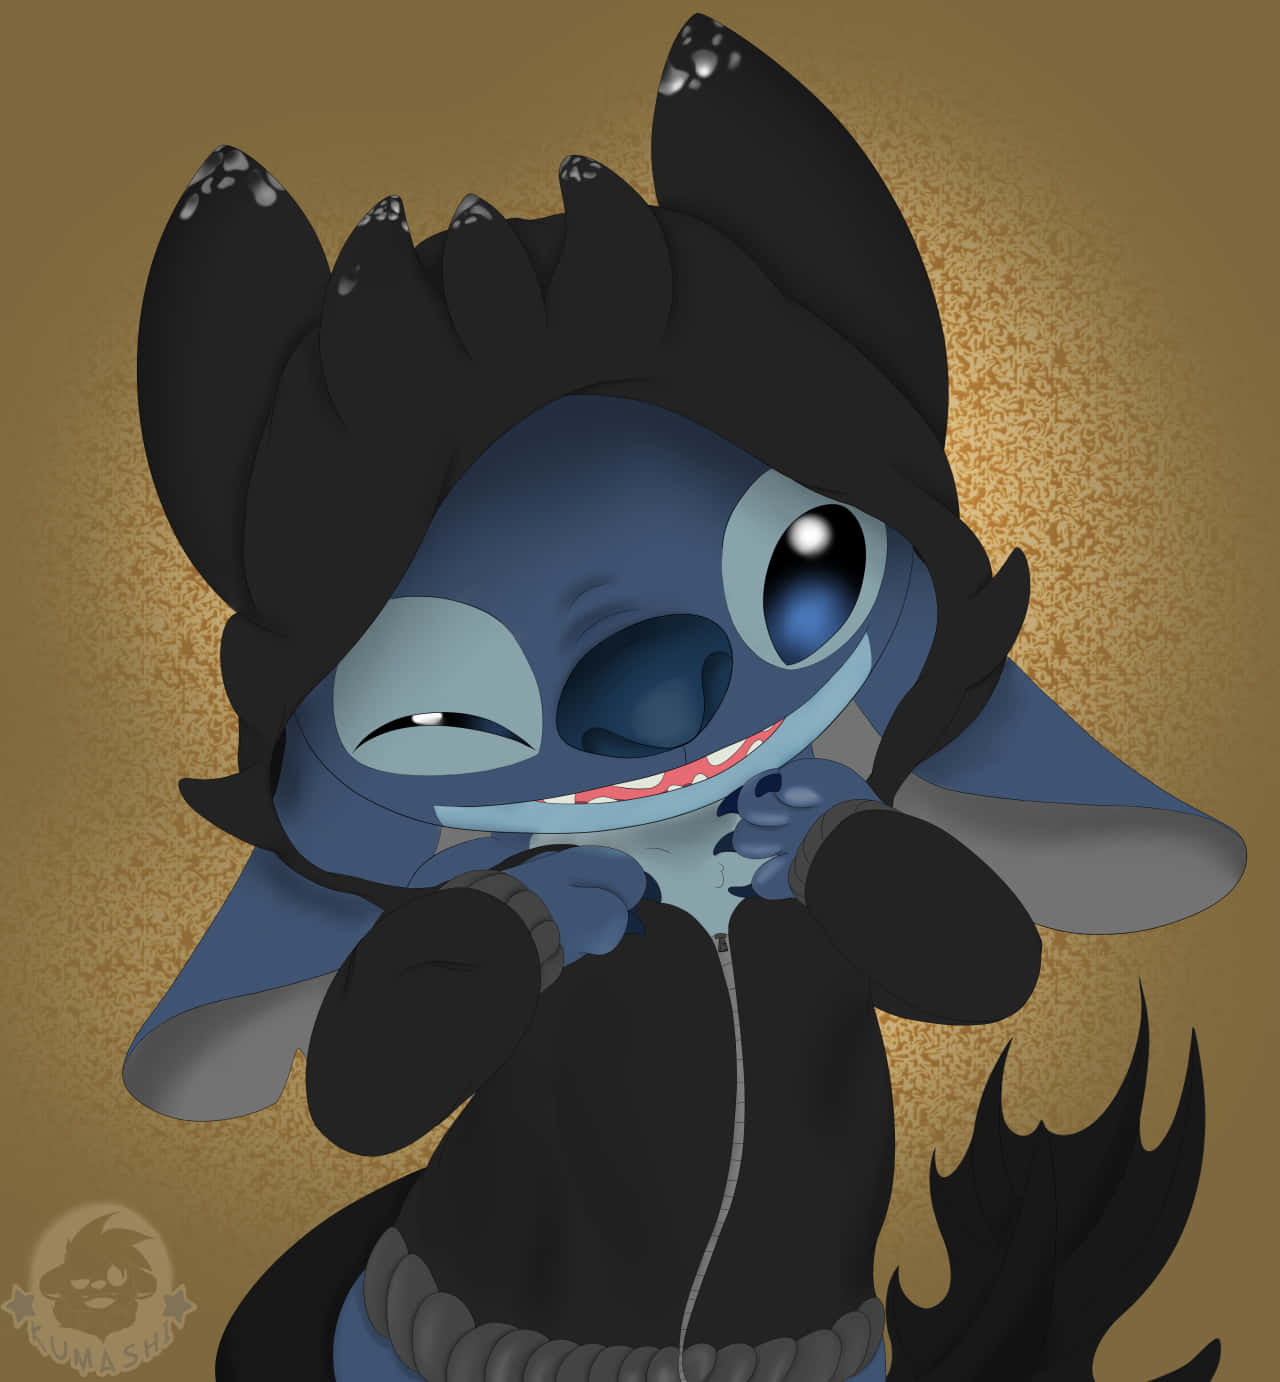 Have Yourself a Spooky Stitch-y Halloween Wallpaper